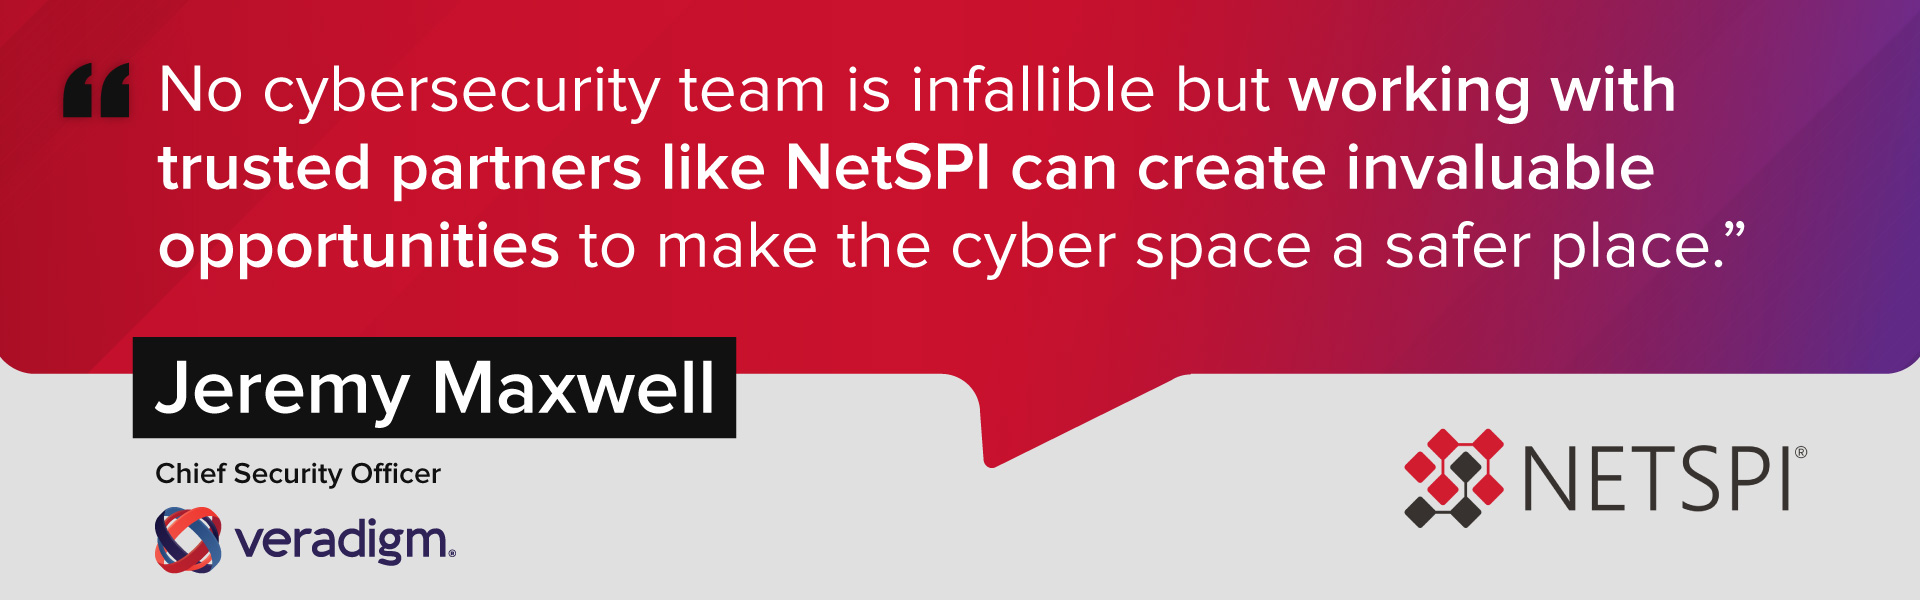 No cybersecurity team is infallible but working with trusted partners like NetSPI can create invaluable opportunities to make the cyber space a safer place." says Jeremy Maxwell, Chief Security Officer from Veradigm.